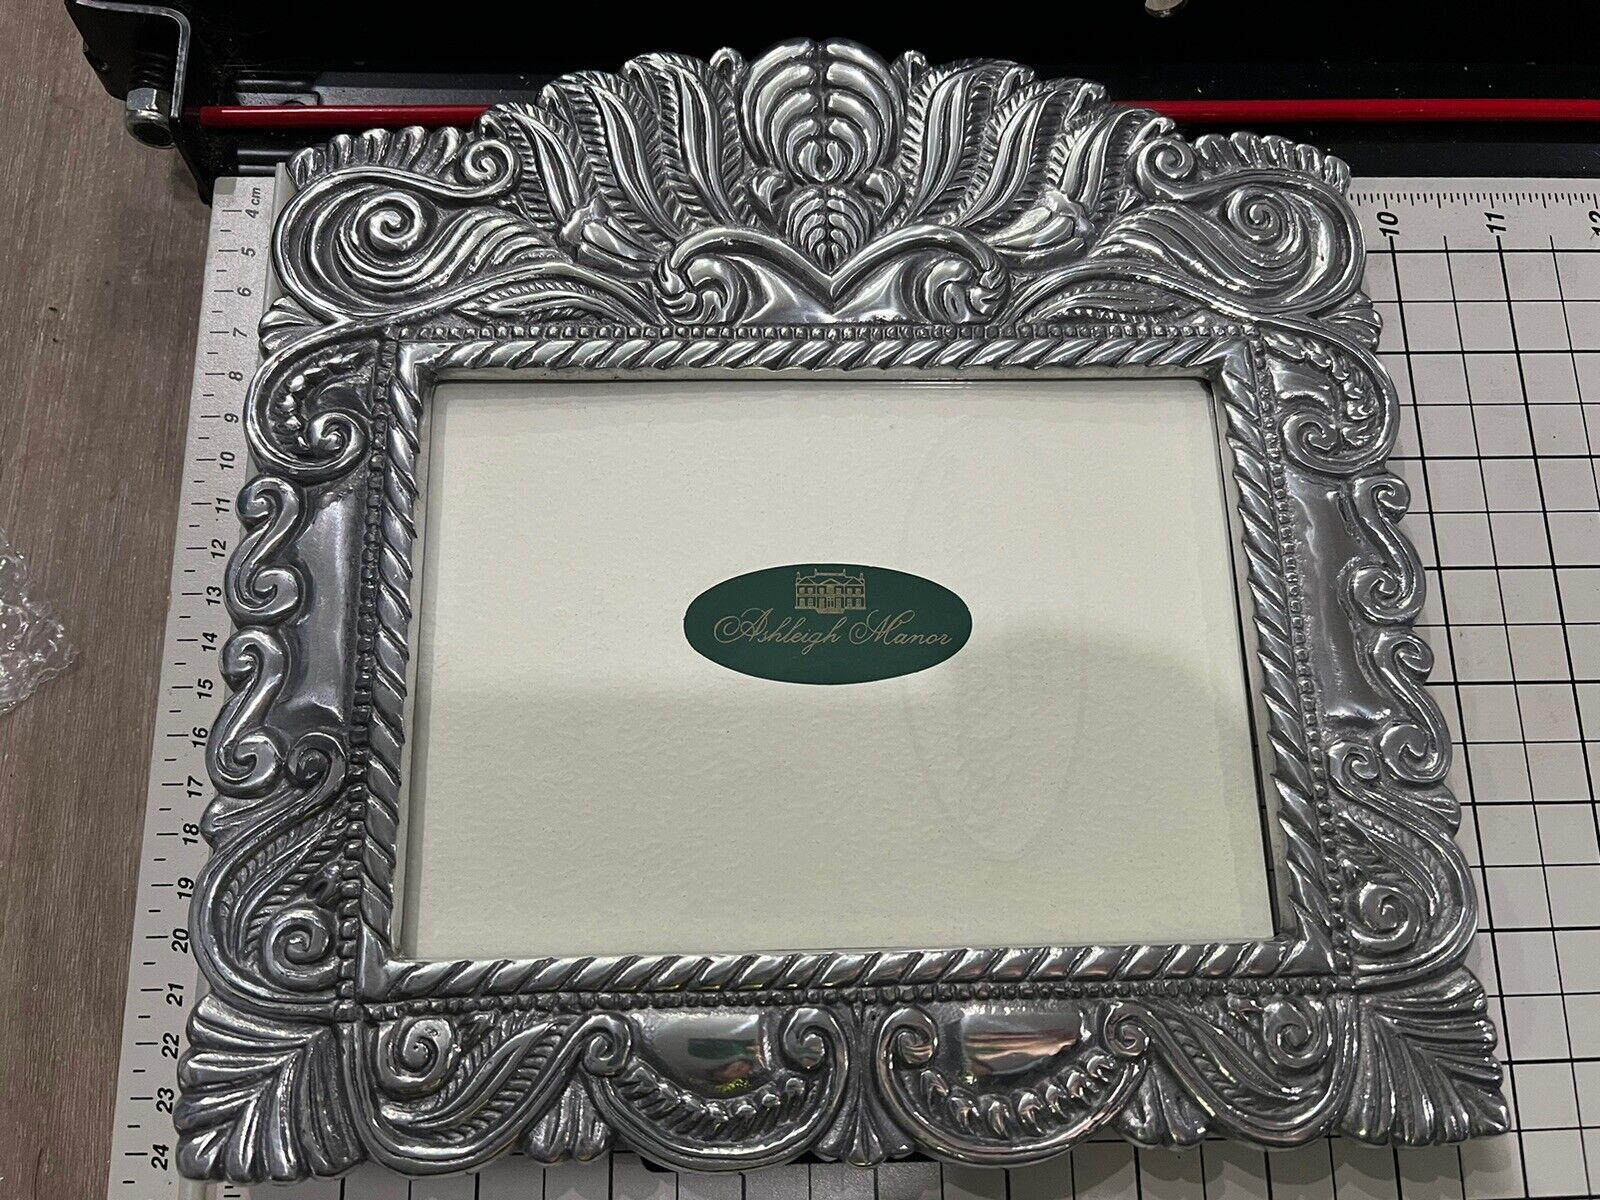 Vintage Ashleigh Manor Handcrafted Pewter Table Top Pic Frame 9.5 x 9.5”Fits 7x5